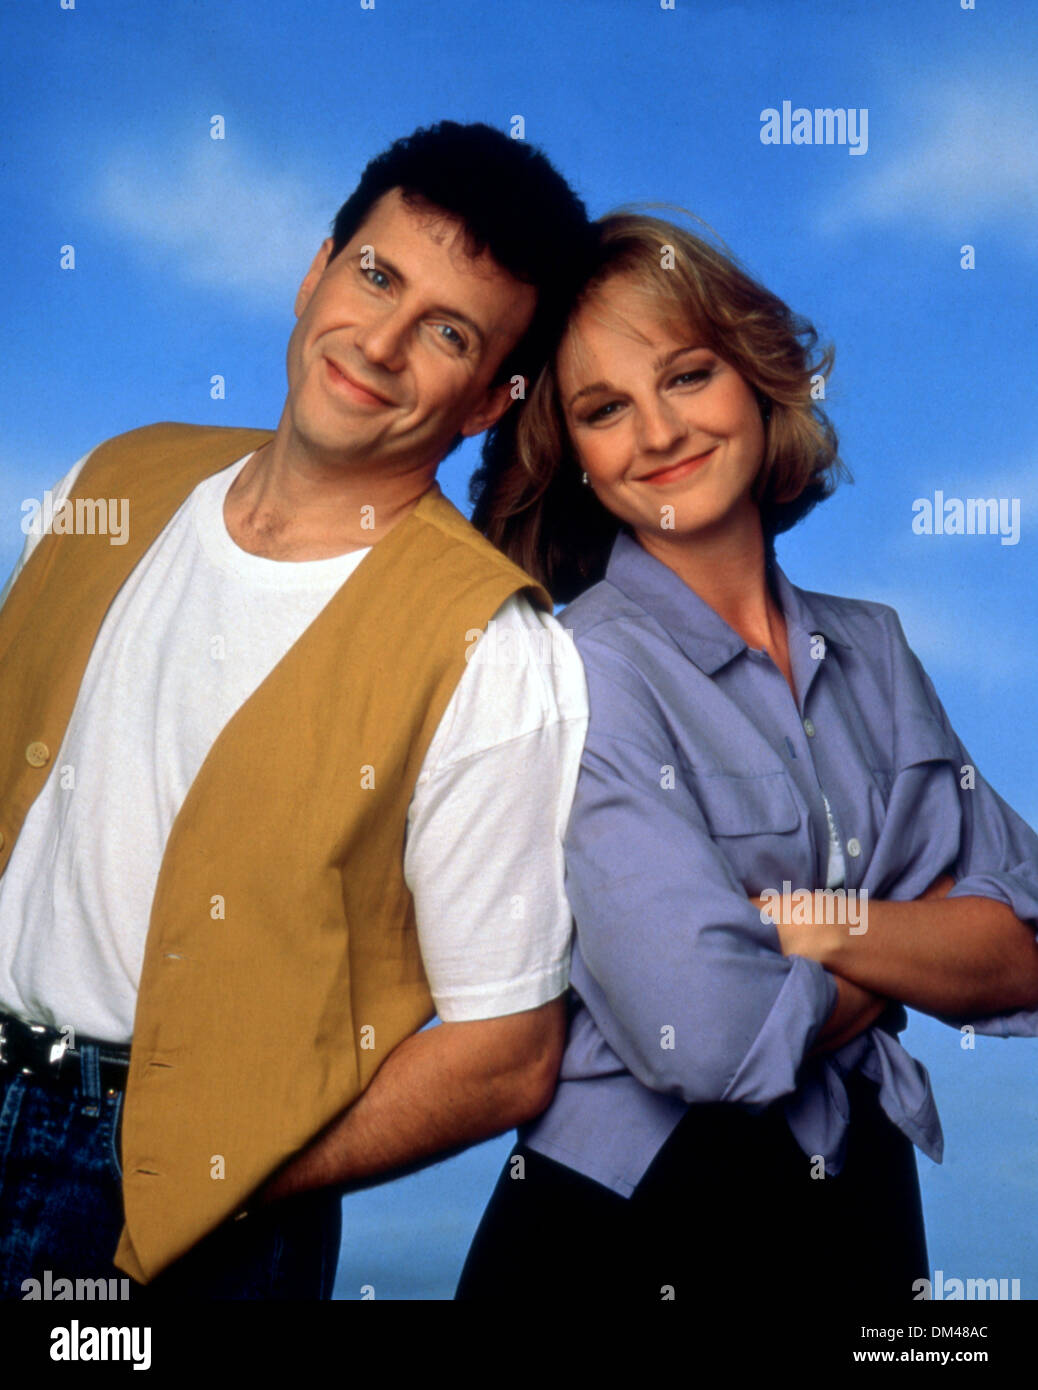 MAD ABOUT YOU (TV) PAUL REISER, HELEN HUNT, MAYU 038 MOVIESTORE COLLECTION LTD Stock Photo